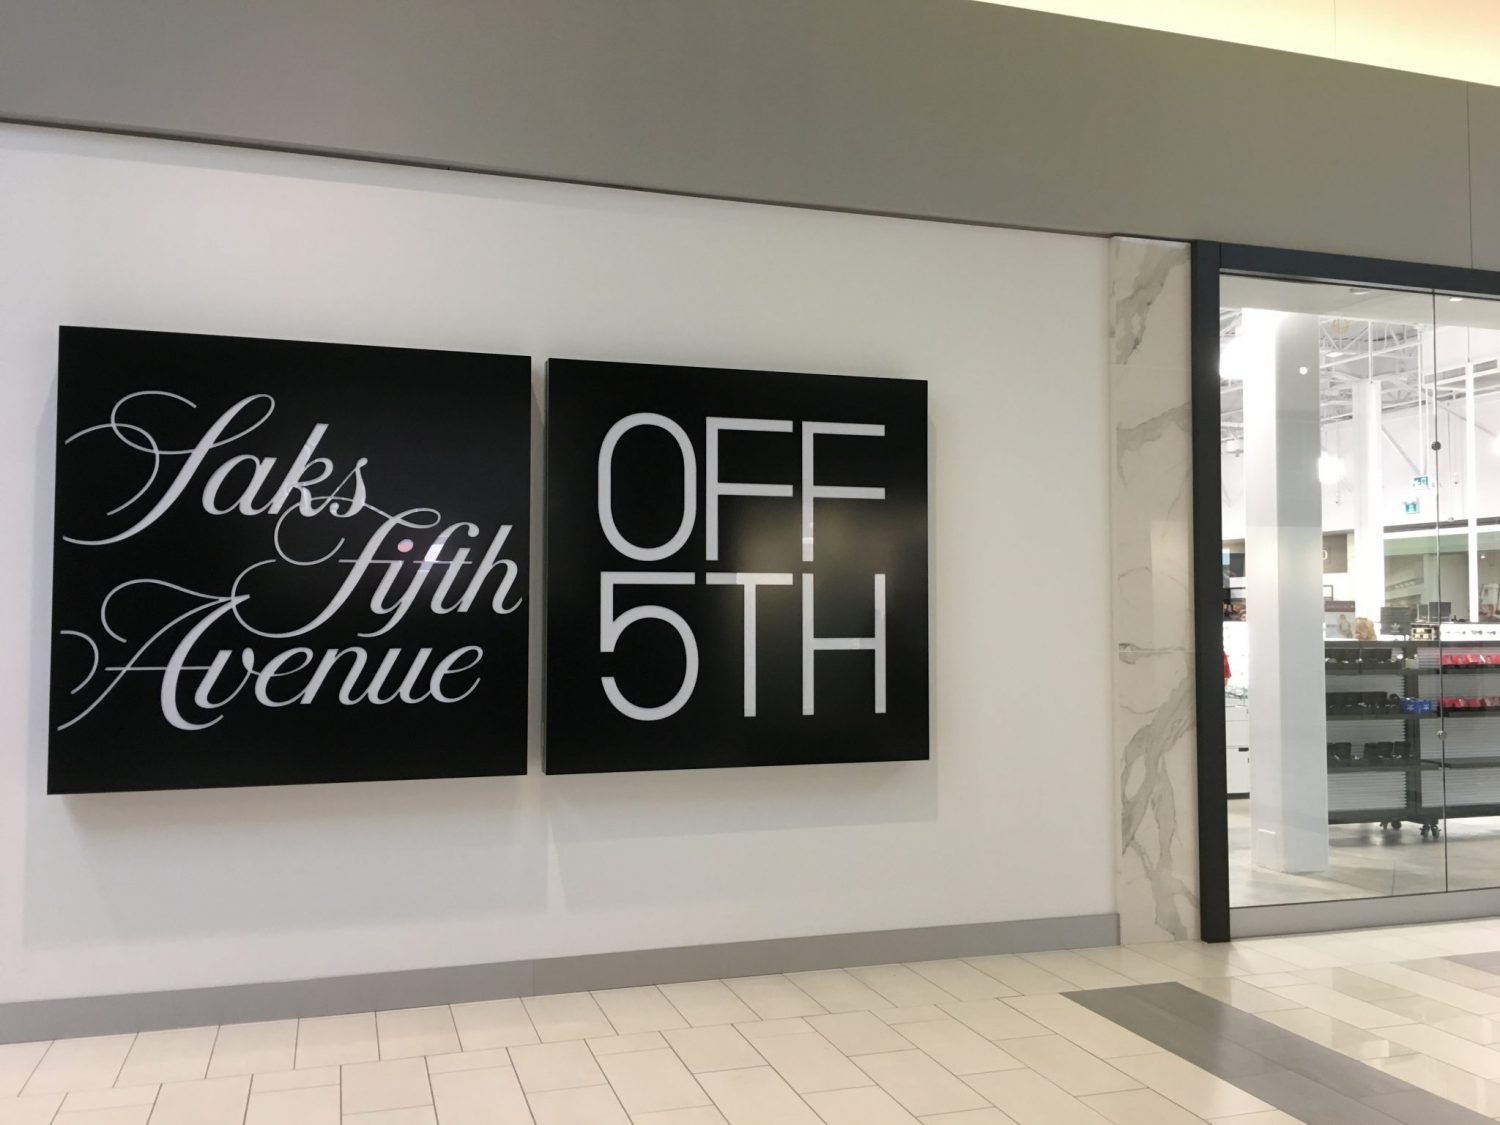 Saks OFF 5TH opens at Park Royal August 3 - urbanYVR